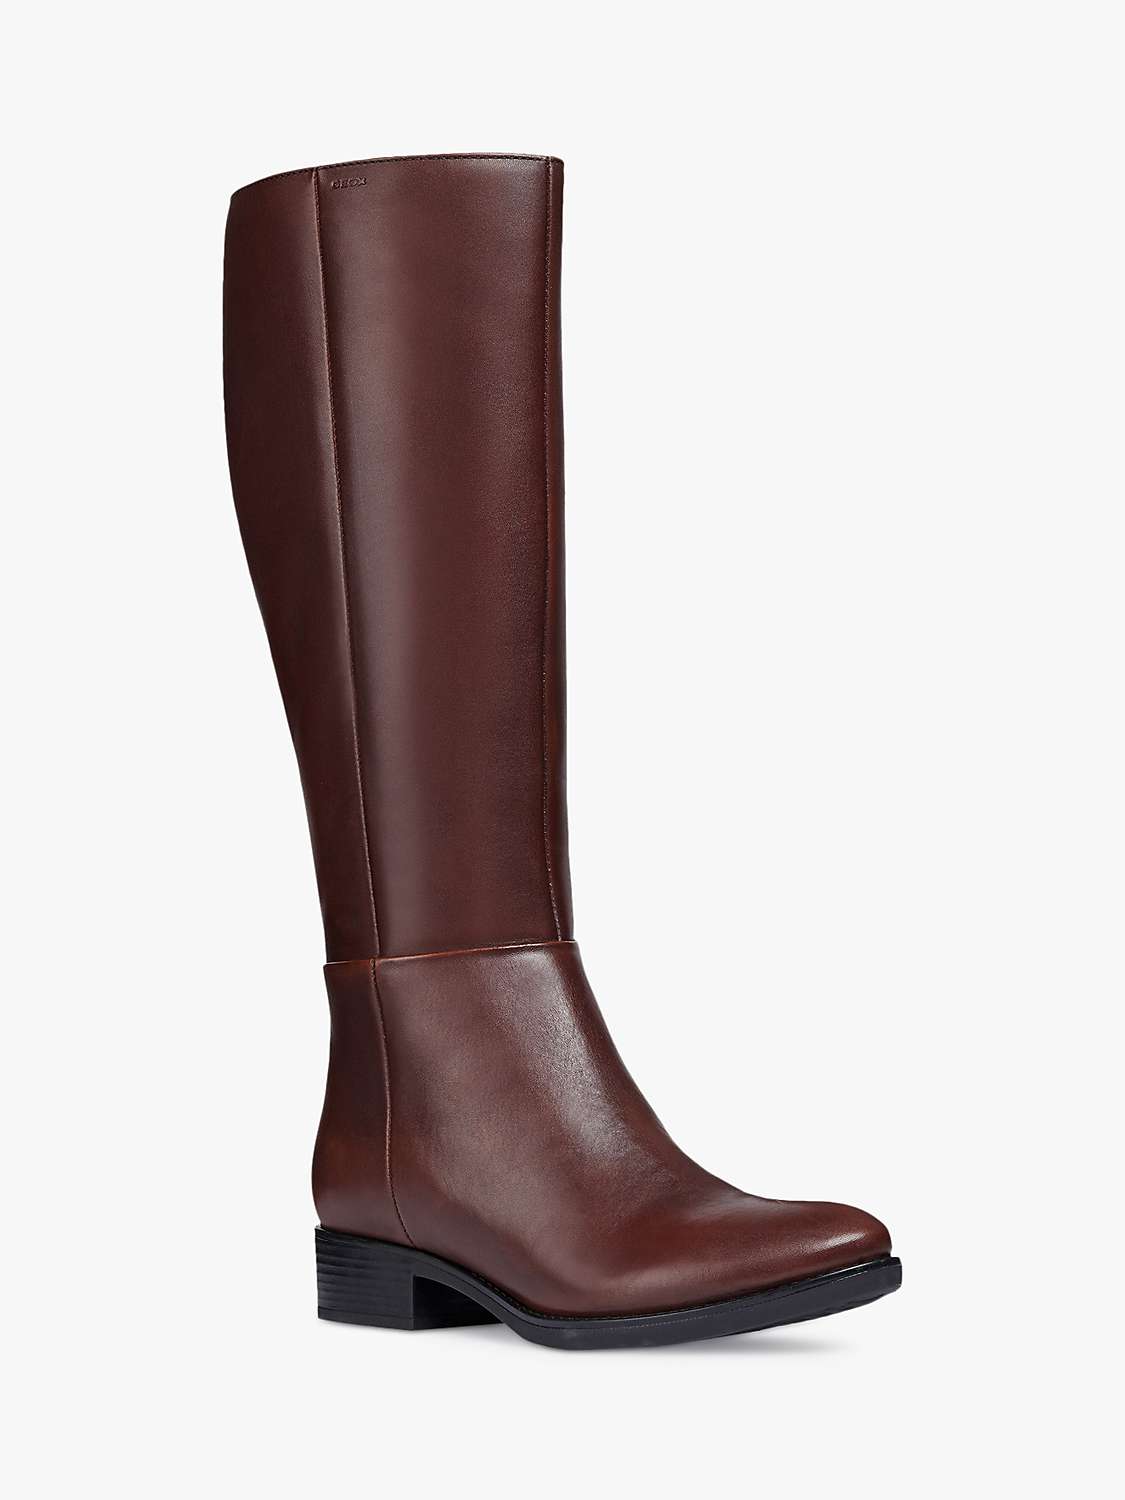 Buy Geox Women's Felicity Leather Heeled Knee High Boots Online at johnlewis.com